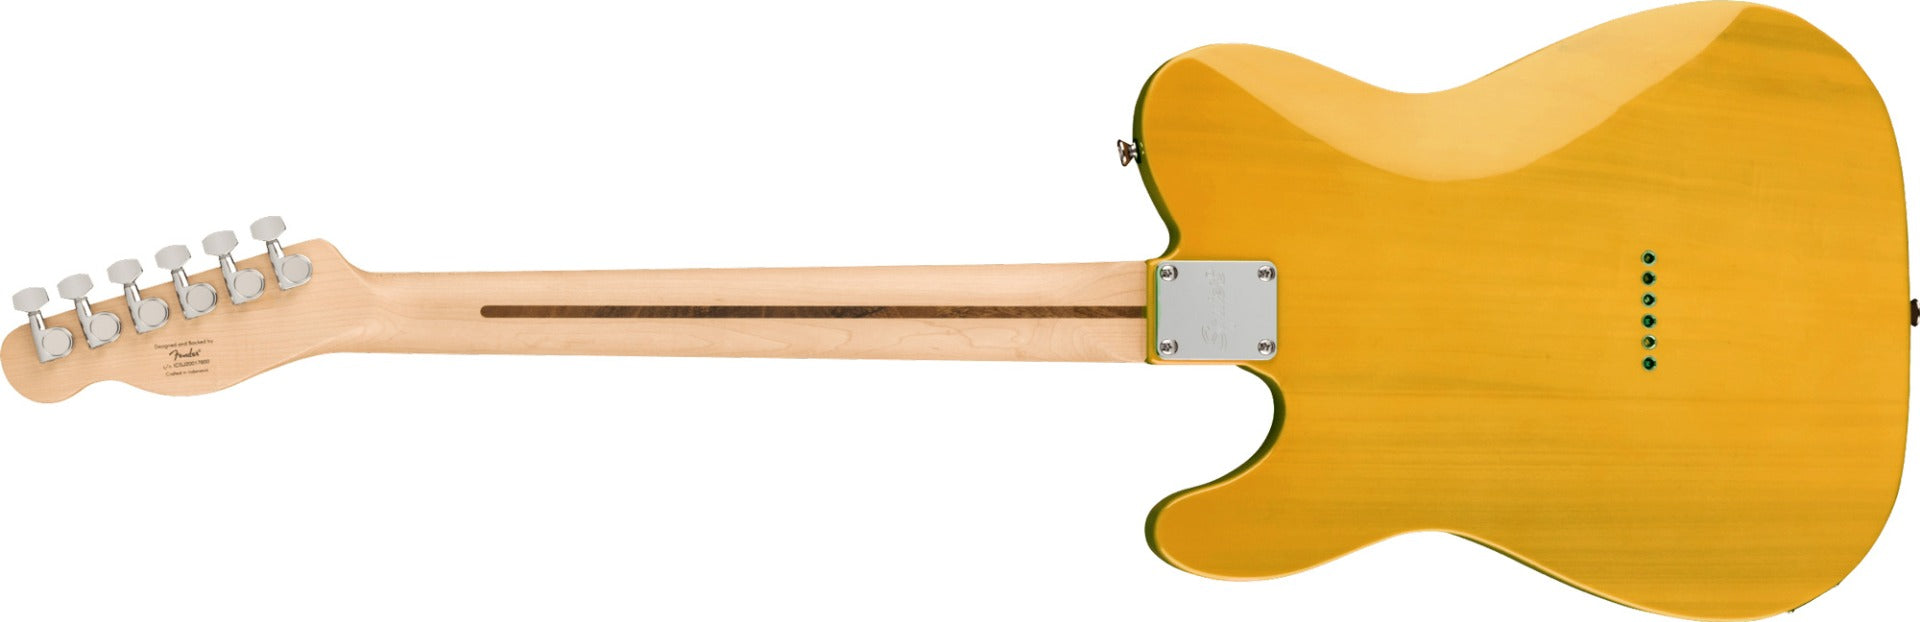 Squier Affinity Telecaster - Maple, Butterscotch Blonde view 3